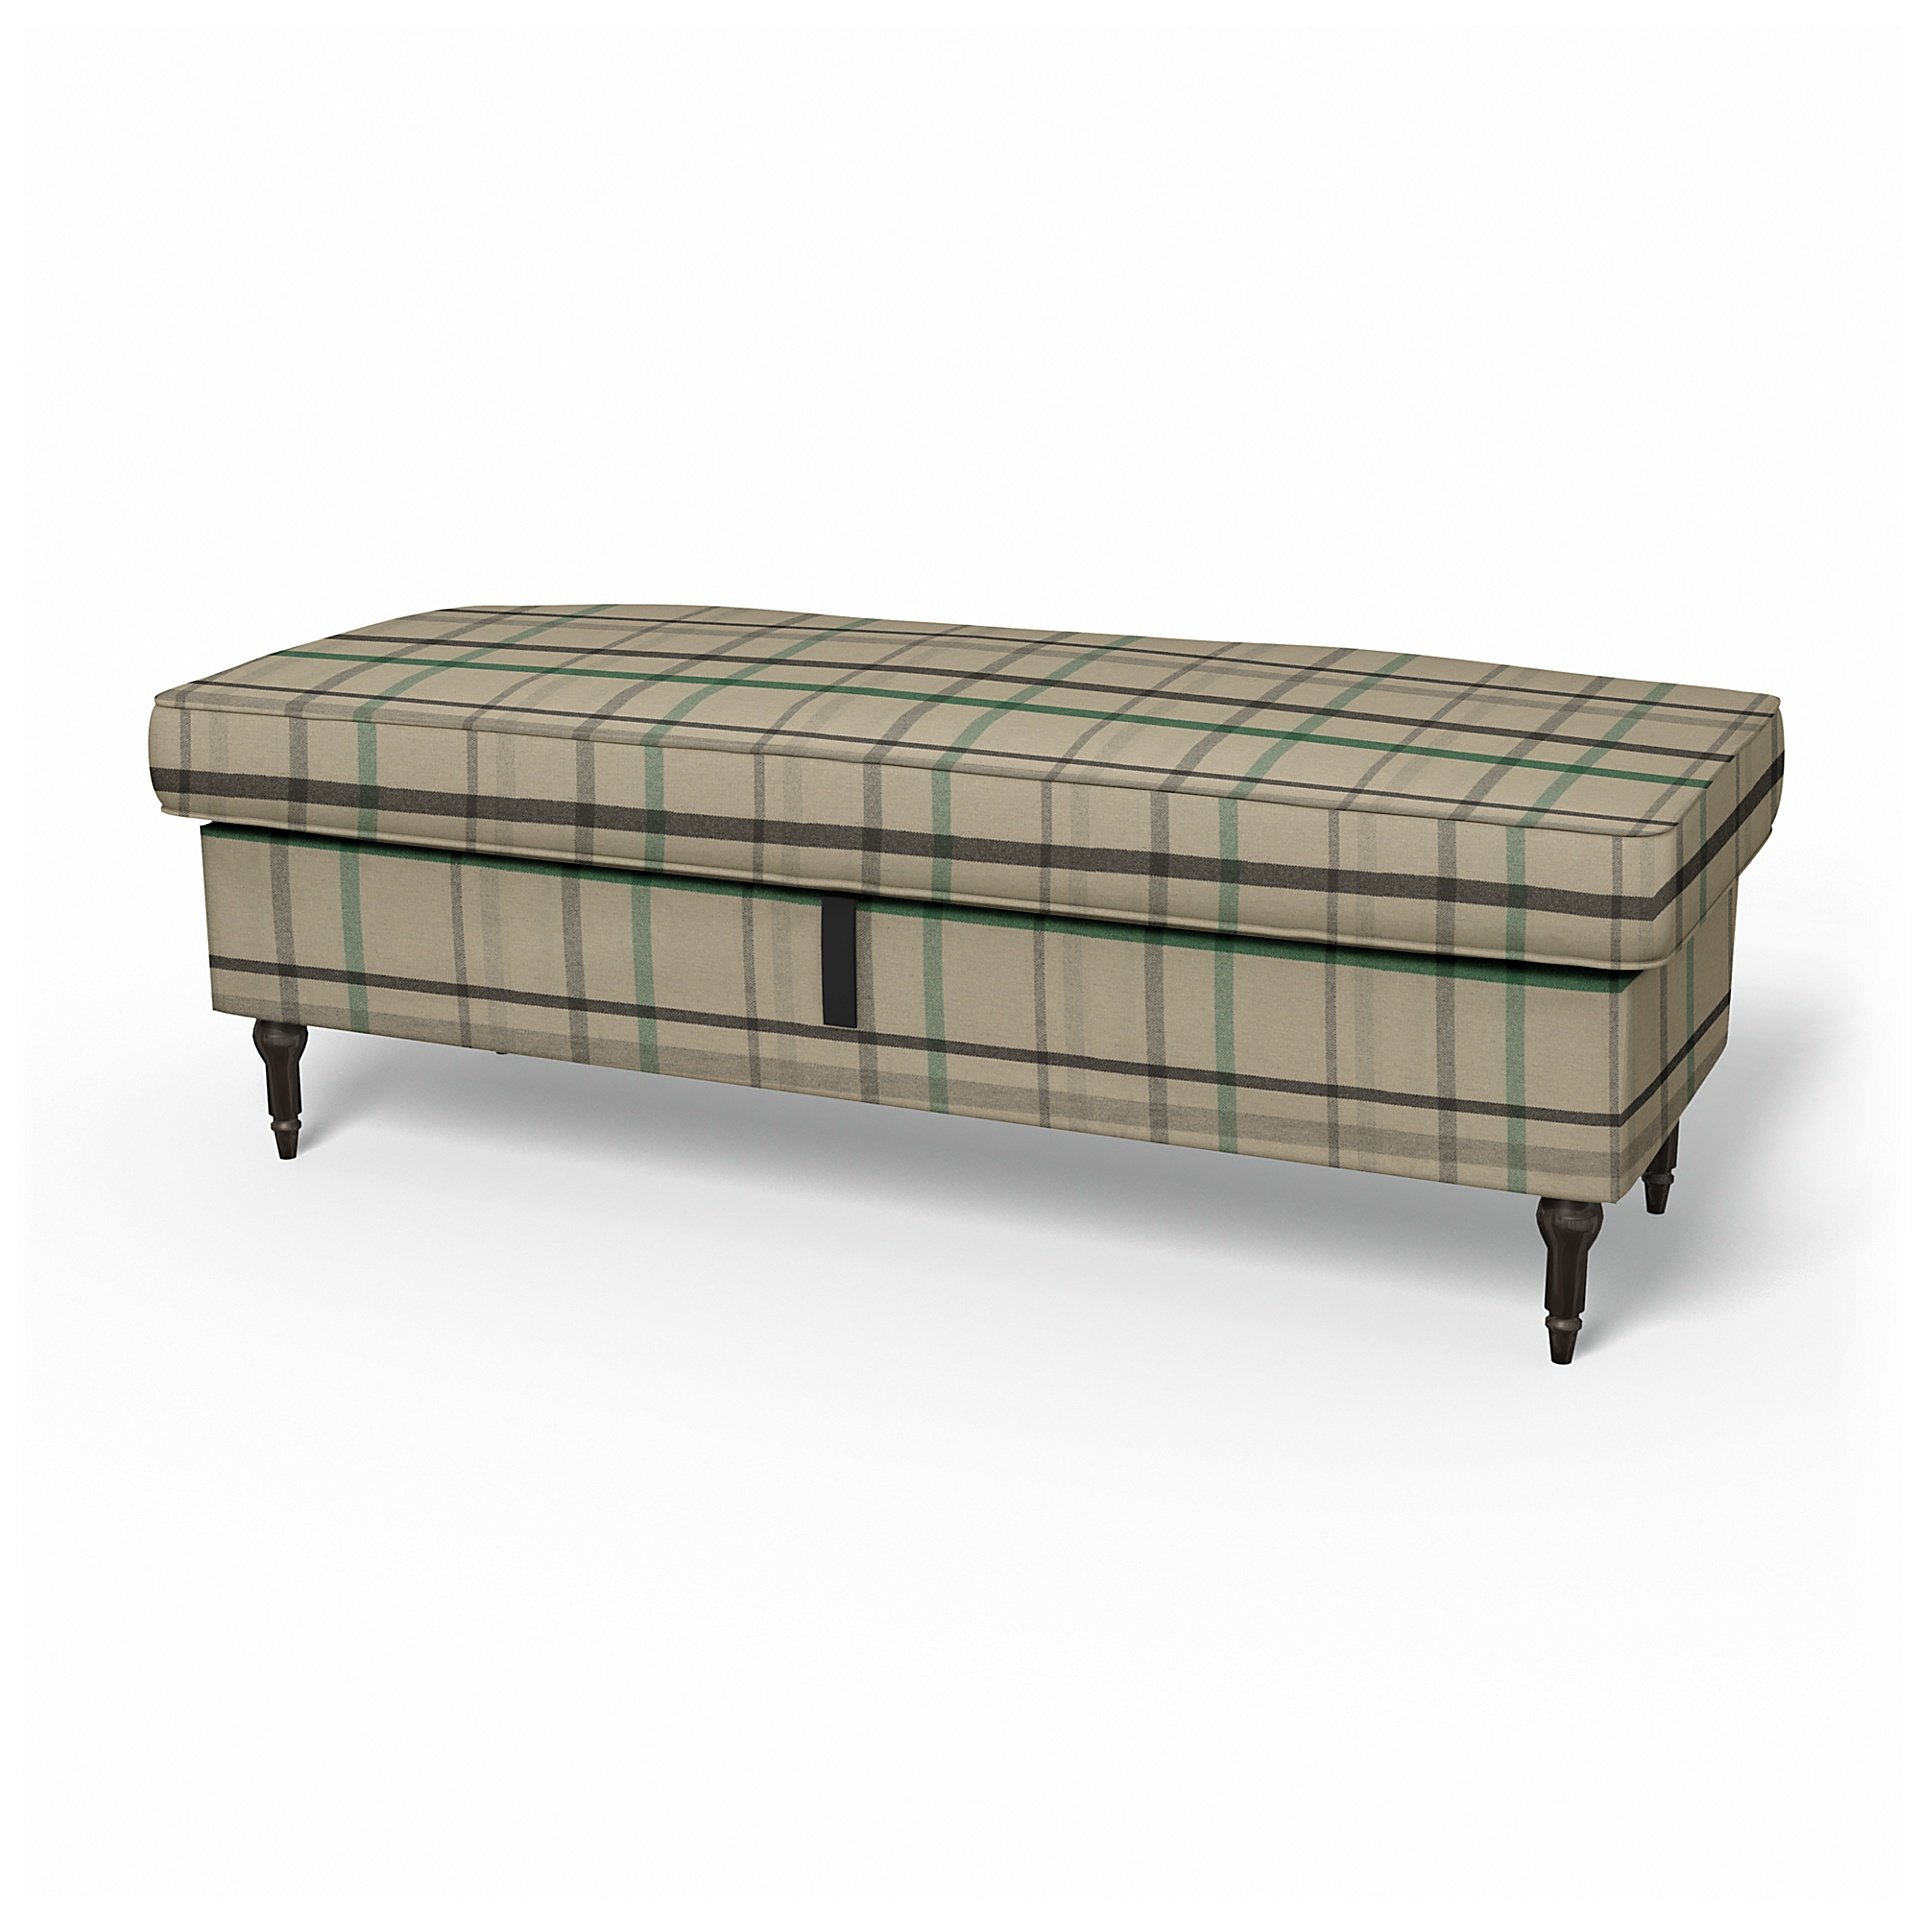 IKEA - Stocksund Bench Cover, Forest Glade, Wool - Bemz